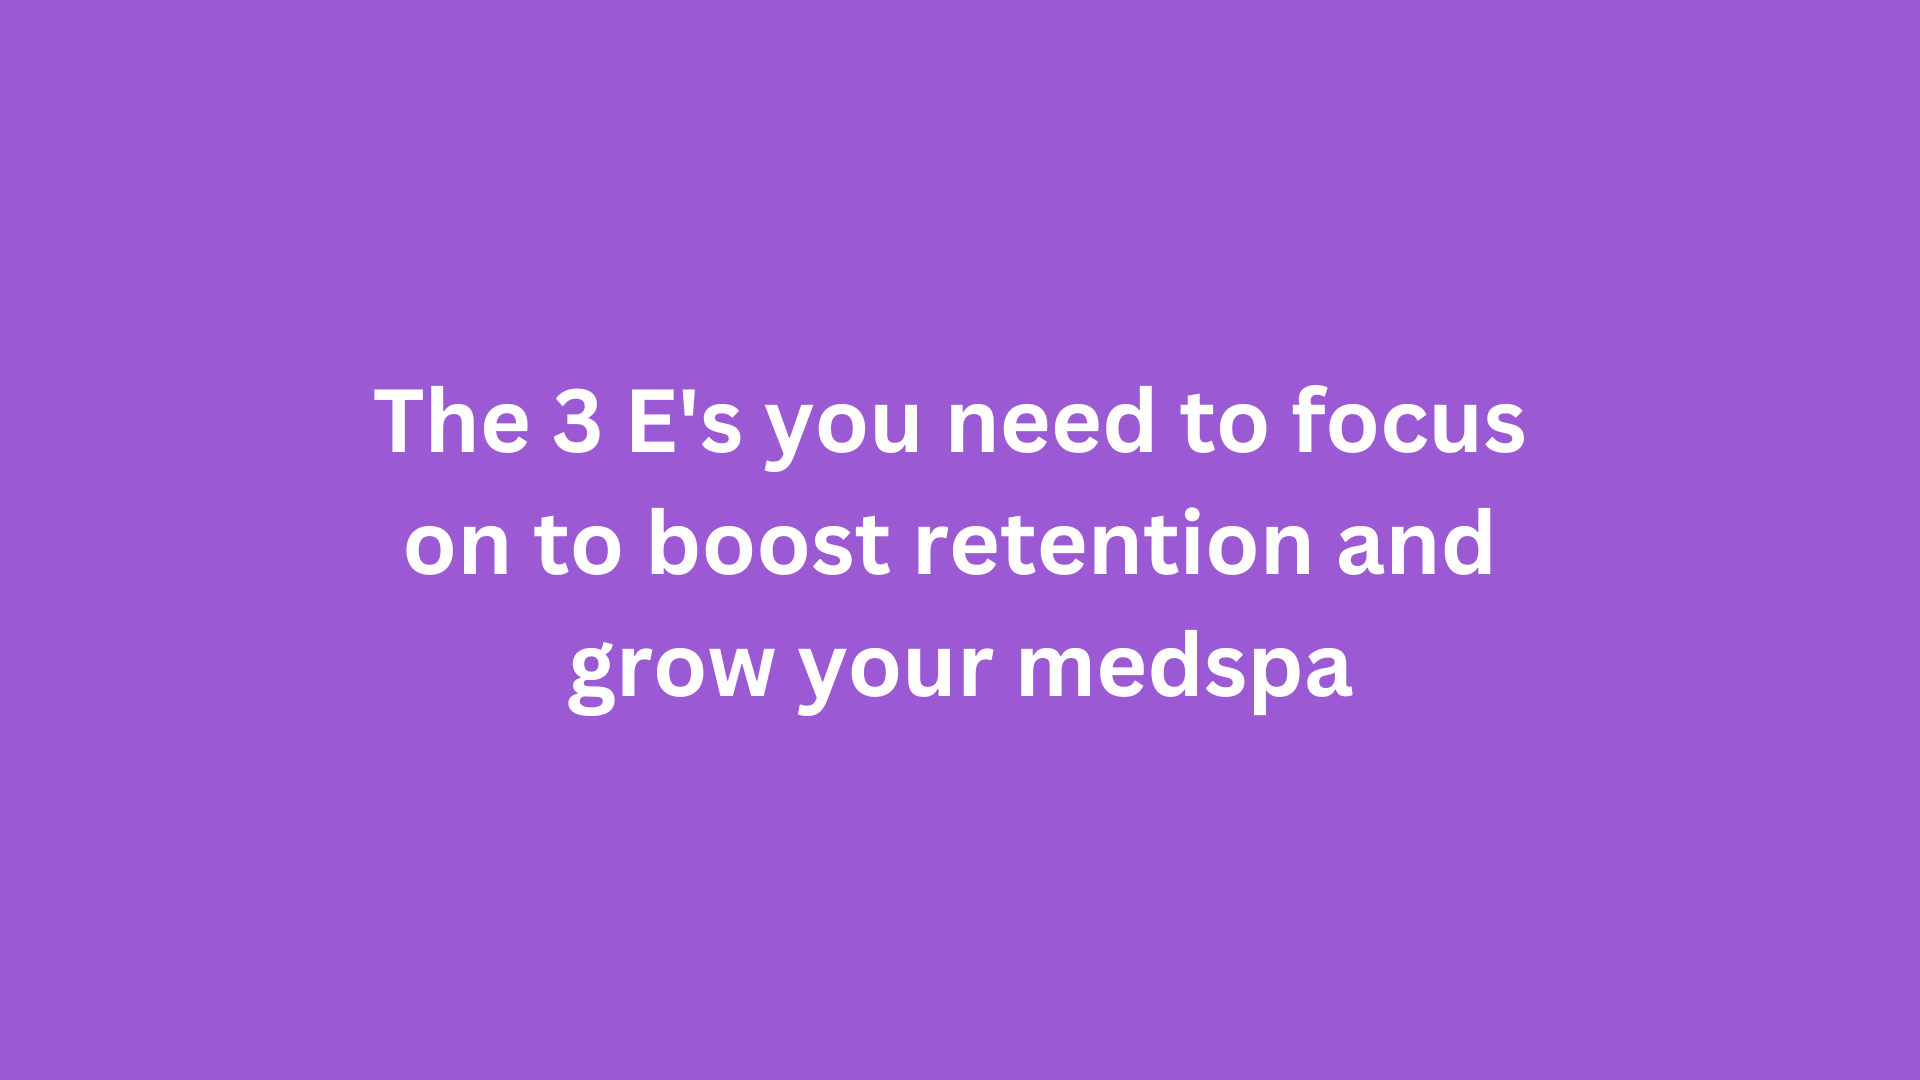 The 3 E's you need to focus on to boost retention and grow your medspa